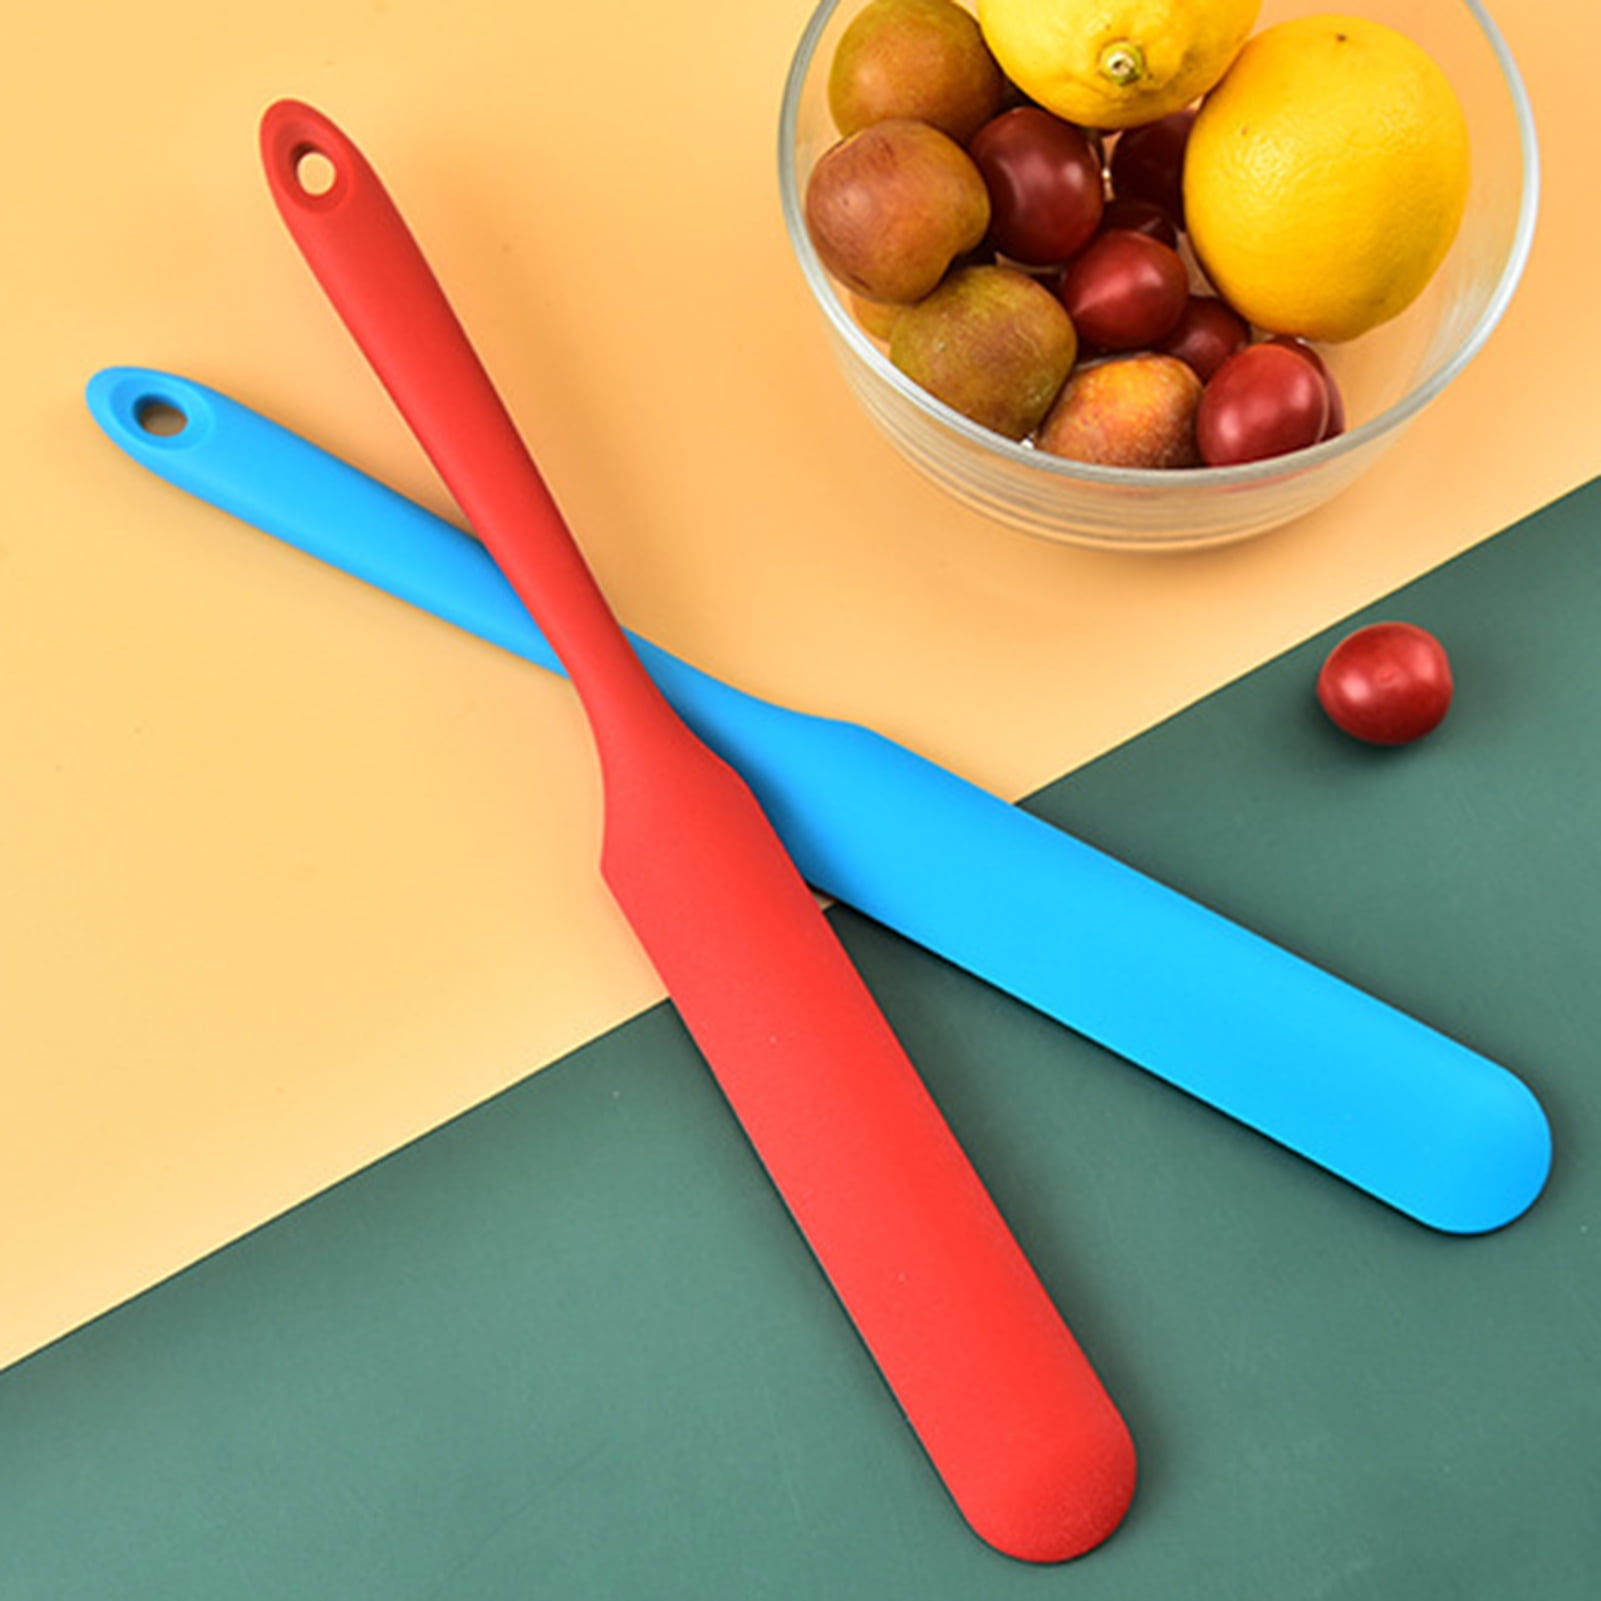 2 Pieces Long Handle Silicone Jar Spatula Non-Stick Rubber Scraper Heat  Resistant Spatula Silicone Scraper for Jars, Smoothies, Blenders Cooking